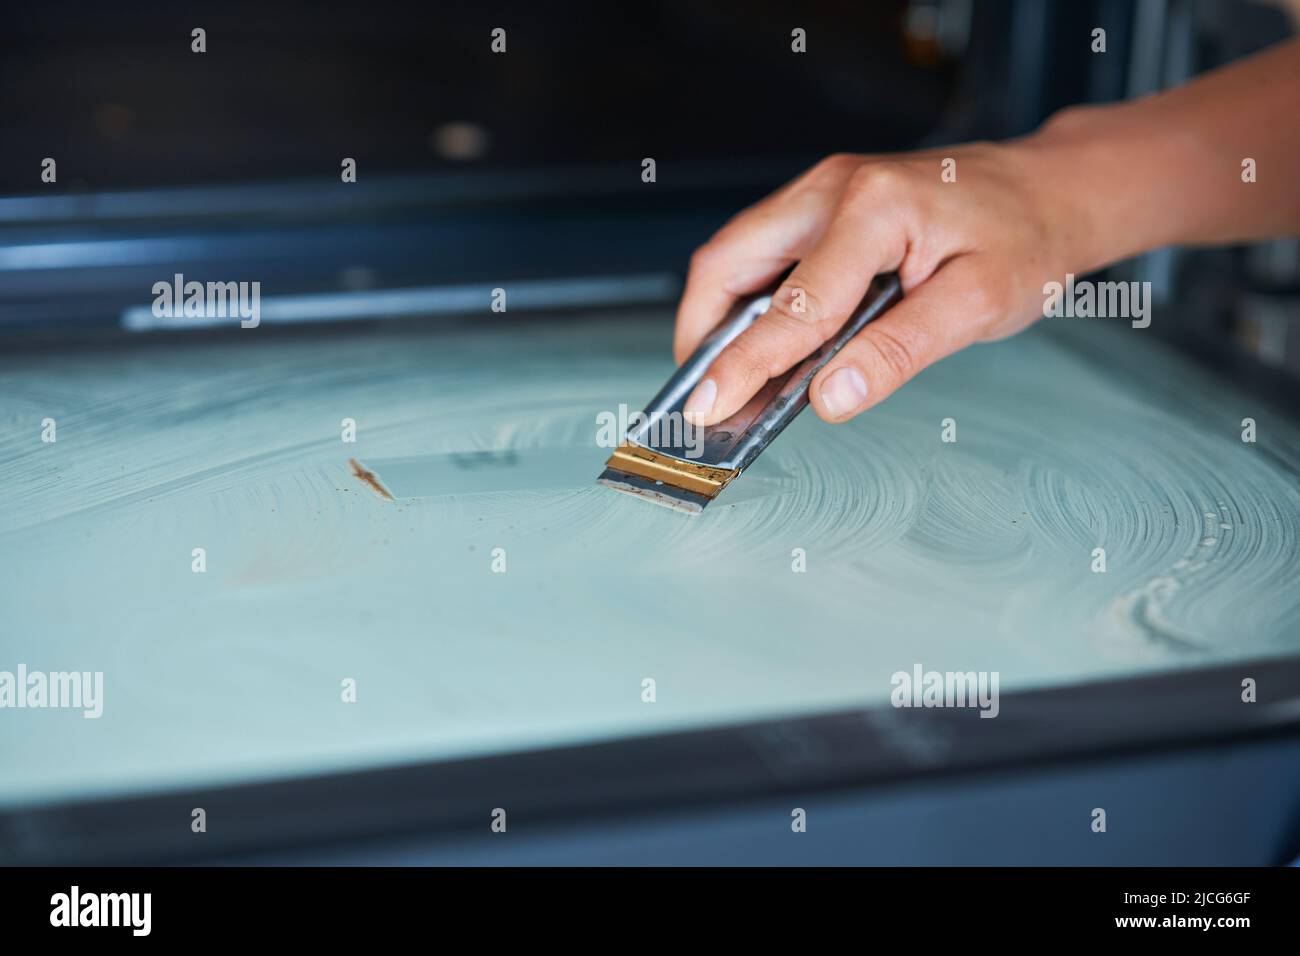 Young woman cleaning oven in the kitchen Stock Photo